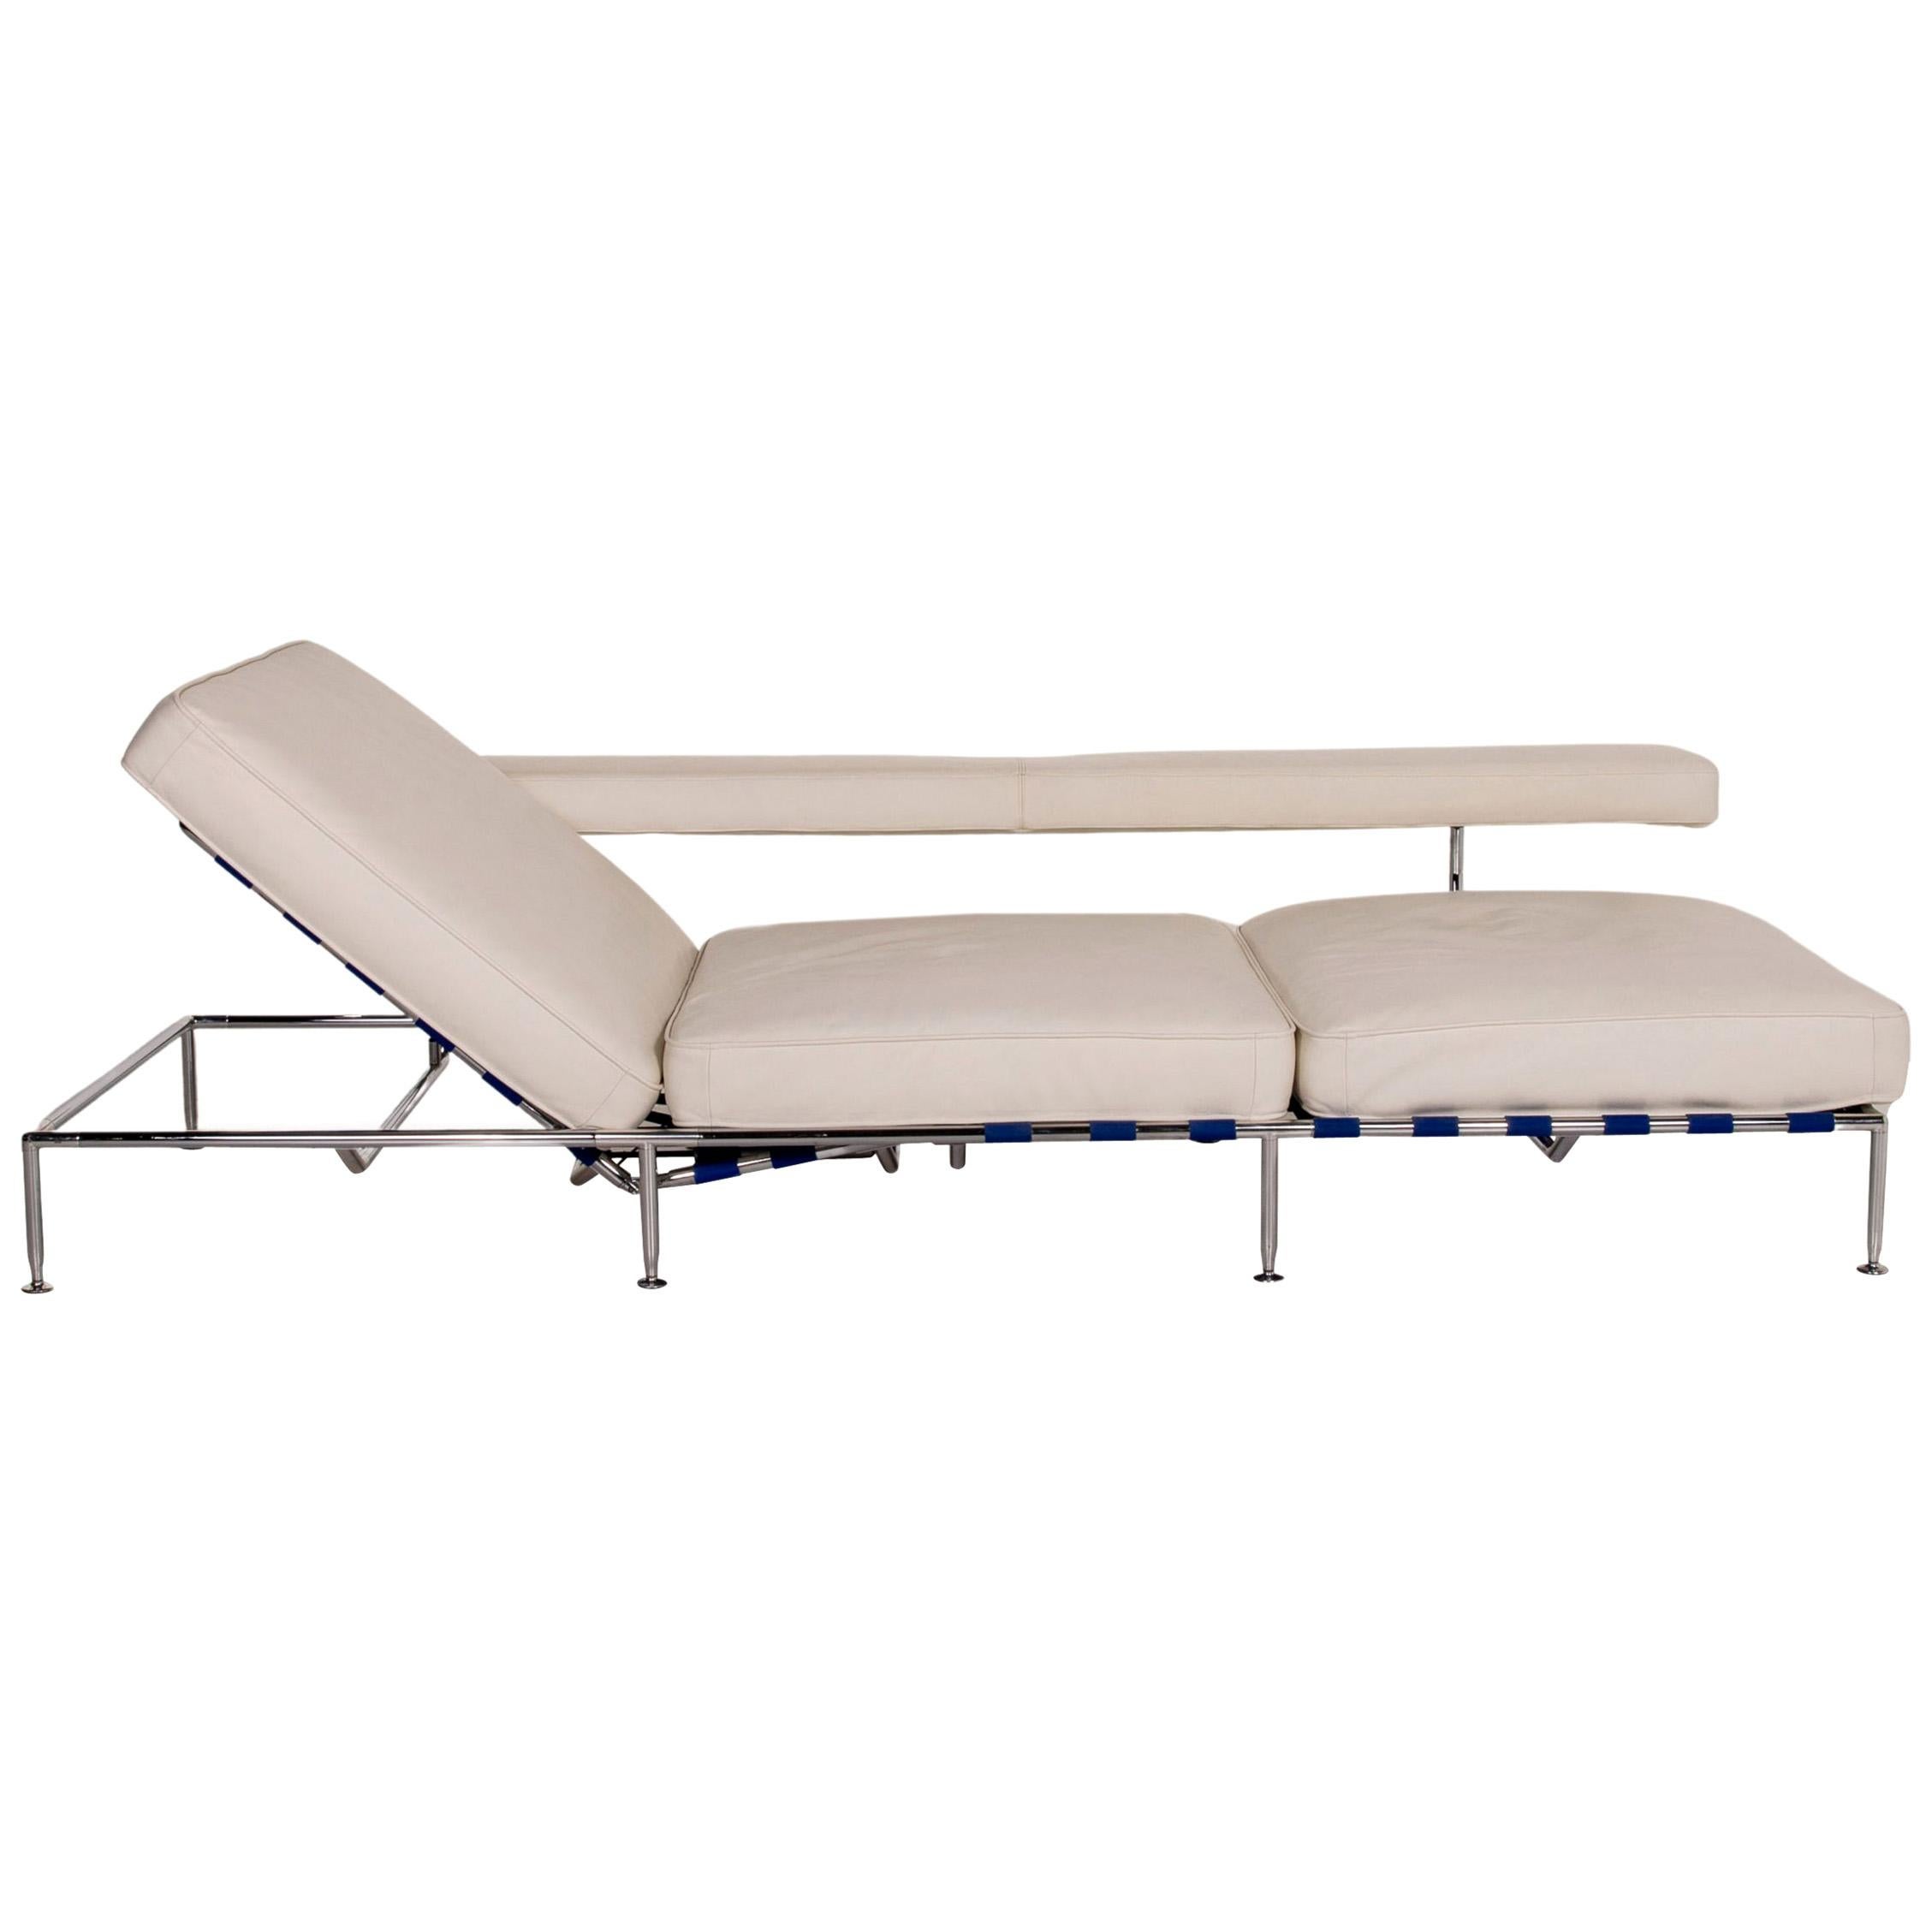 B&B Italia Free Time Leather Lounger White Daybed Sleeping Function Sofa Bed